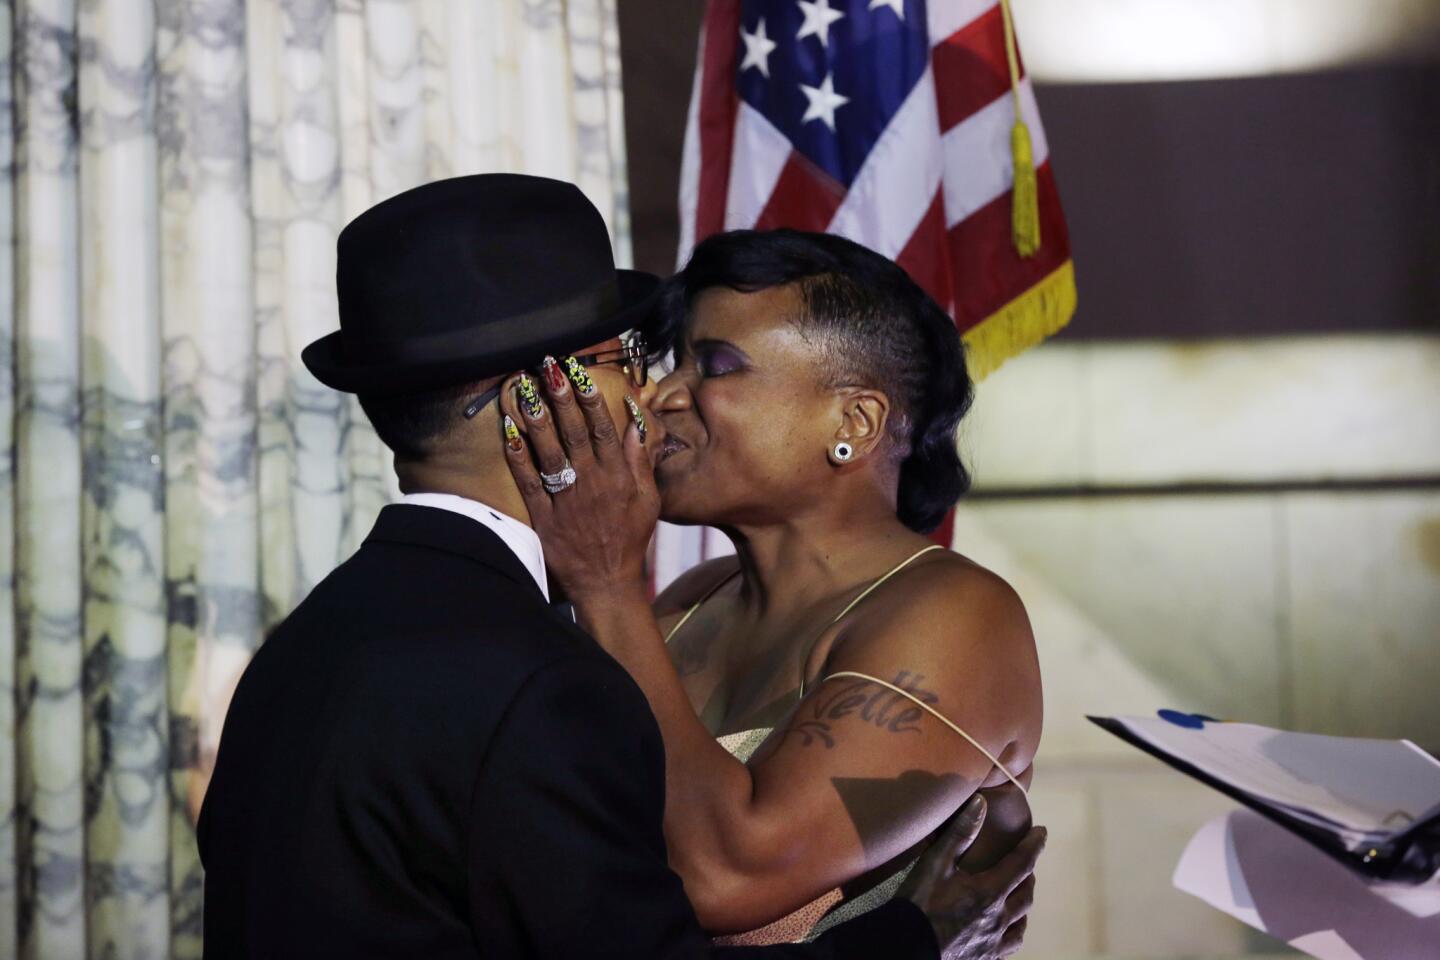 Gay marriage legalized in N.J.